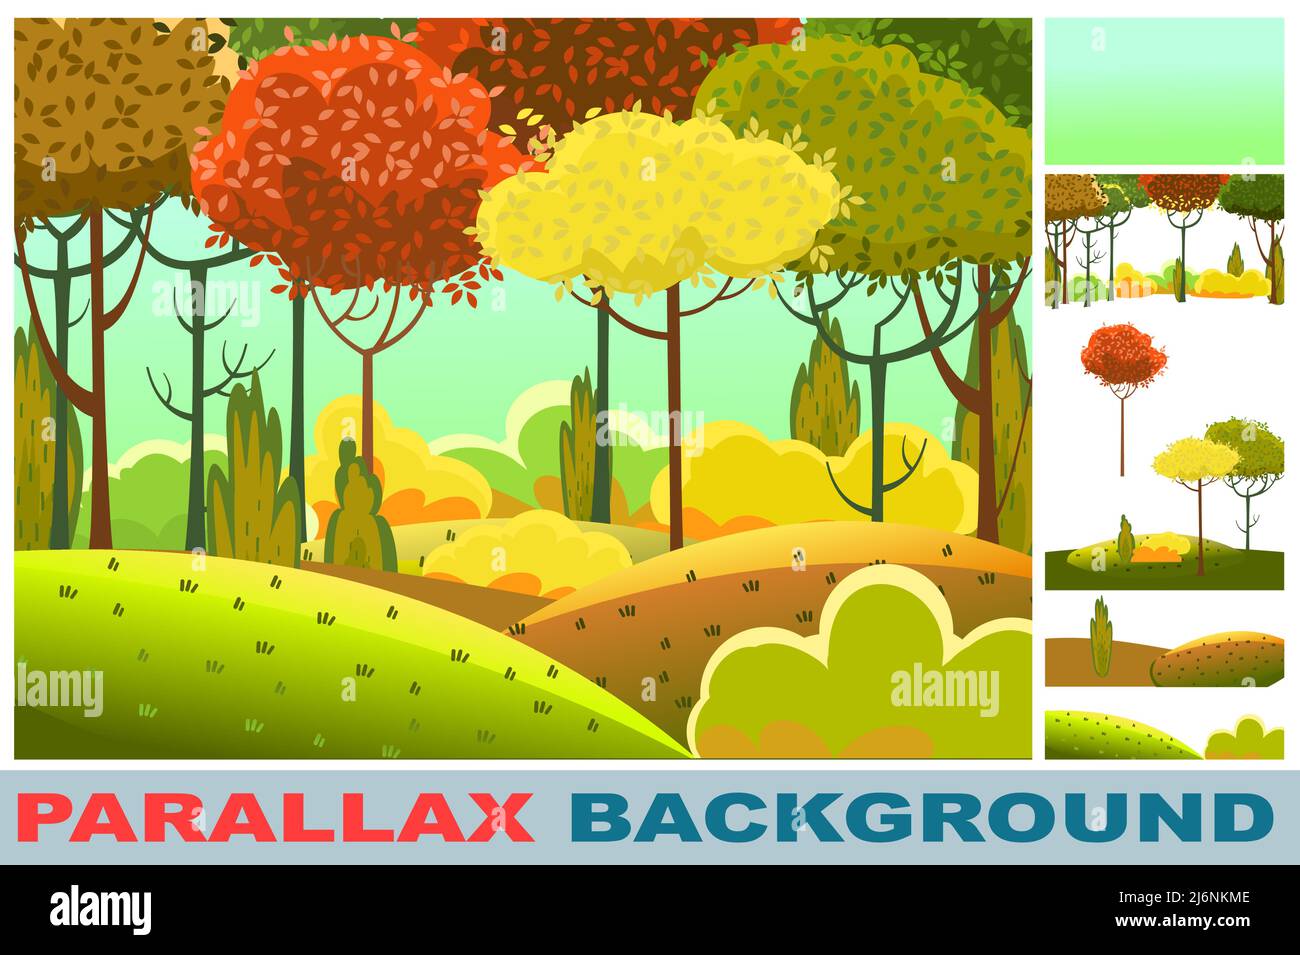 Forest. Set for parallax effect. Funny beautiful autumn landscape. Cartoon style. Leaves. Hills with grass and red, yellow, orange trees. Cool romanti Stock Vector